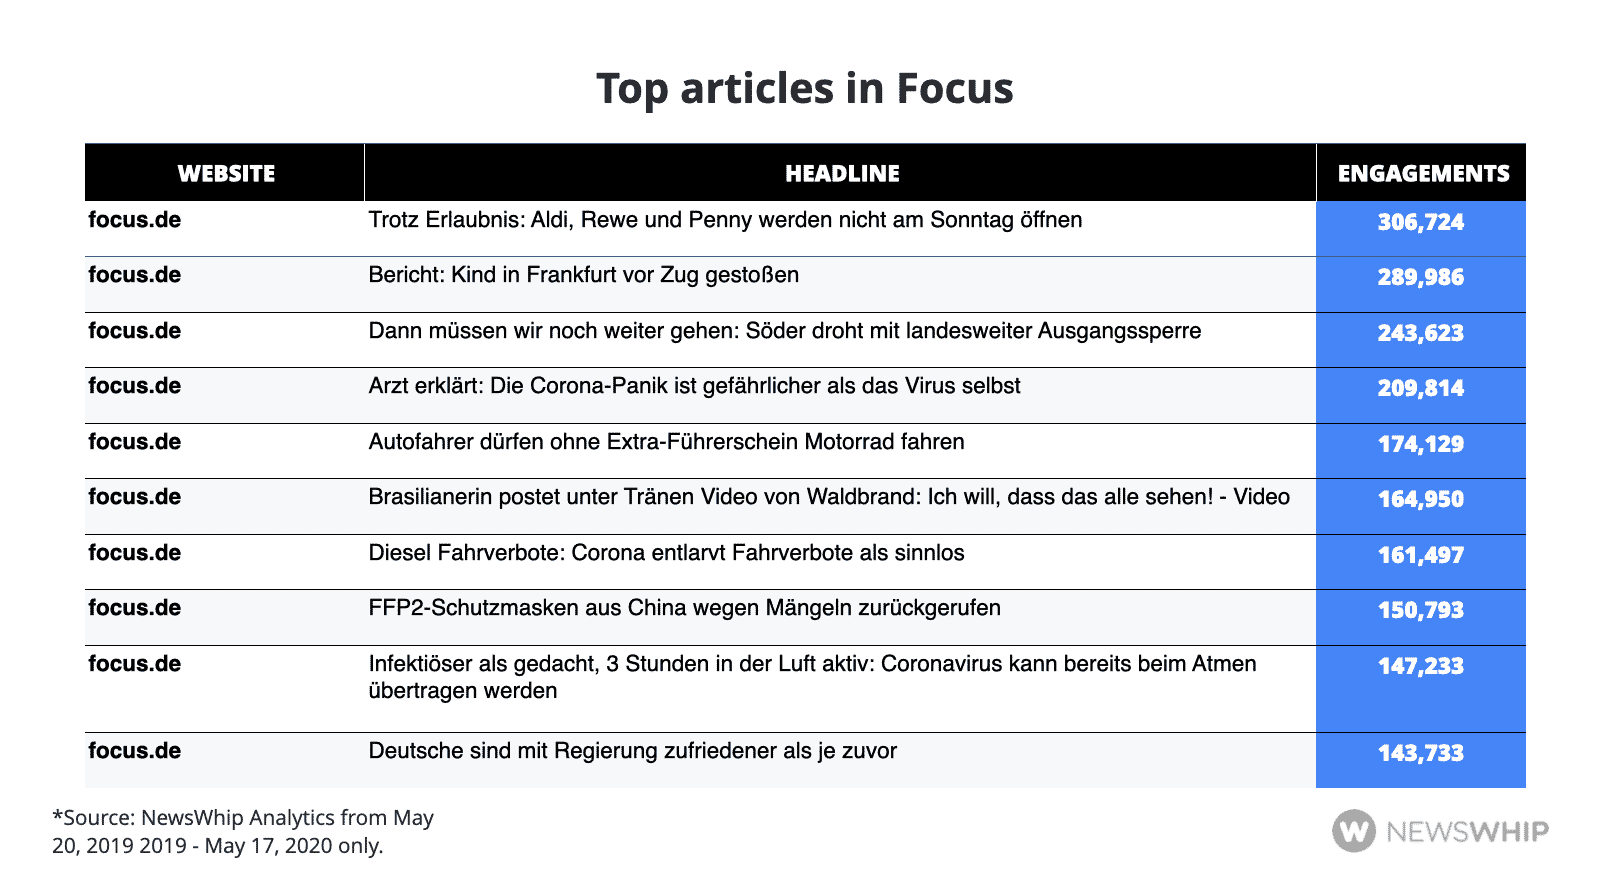 Chart showing the top articles in Focus in the last year, ranked by engagement